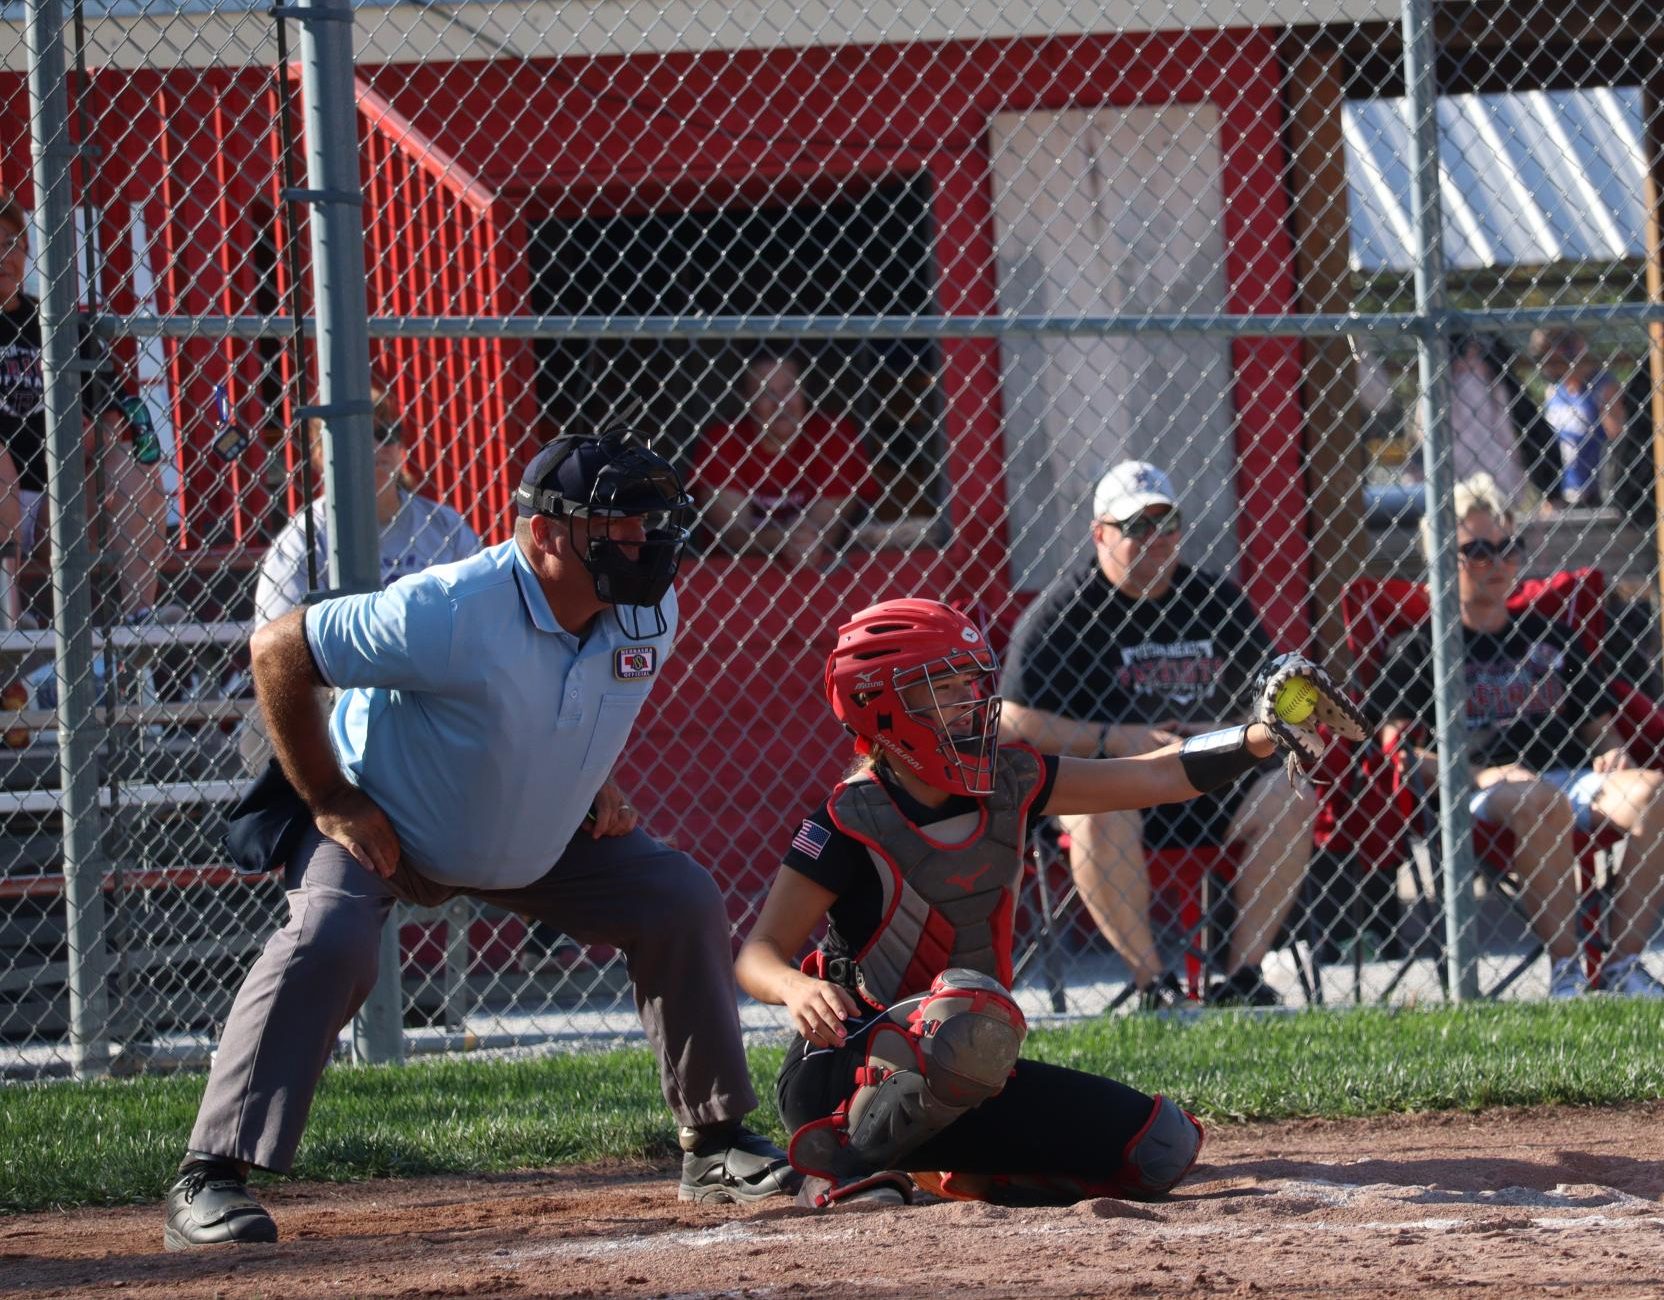 Sophomore Jordyn Campbell catches ball securing the strikeout. Campbell previously played third base during the 2022 season and switched to catcher this season.